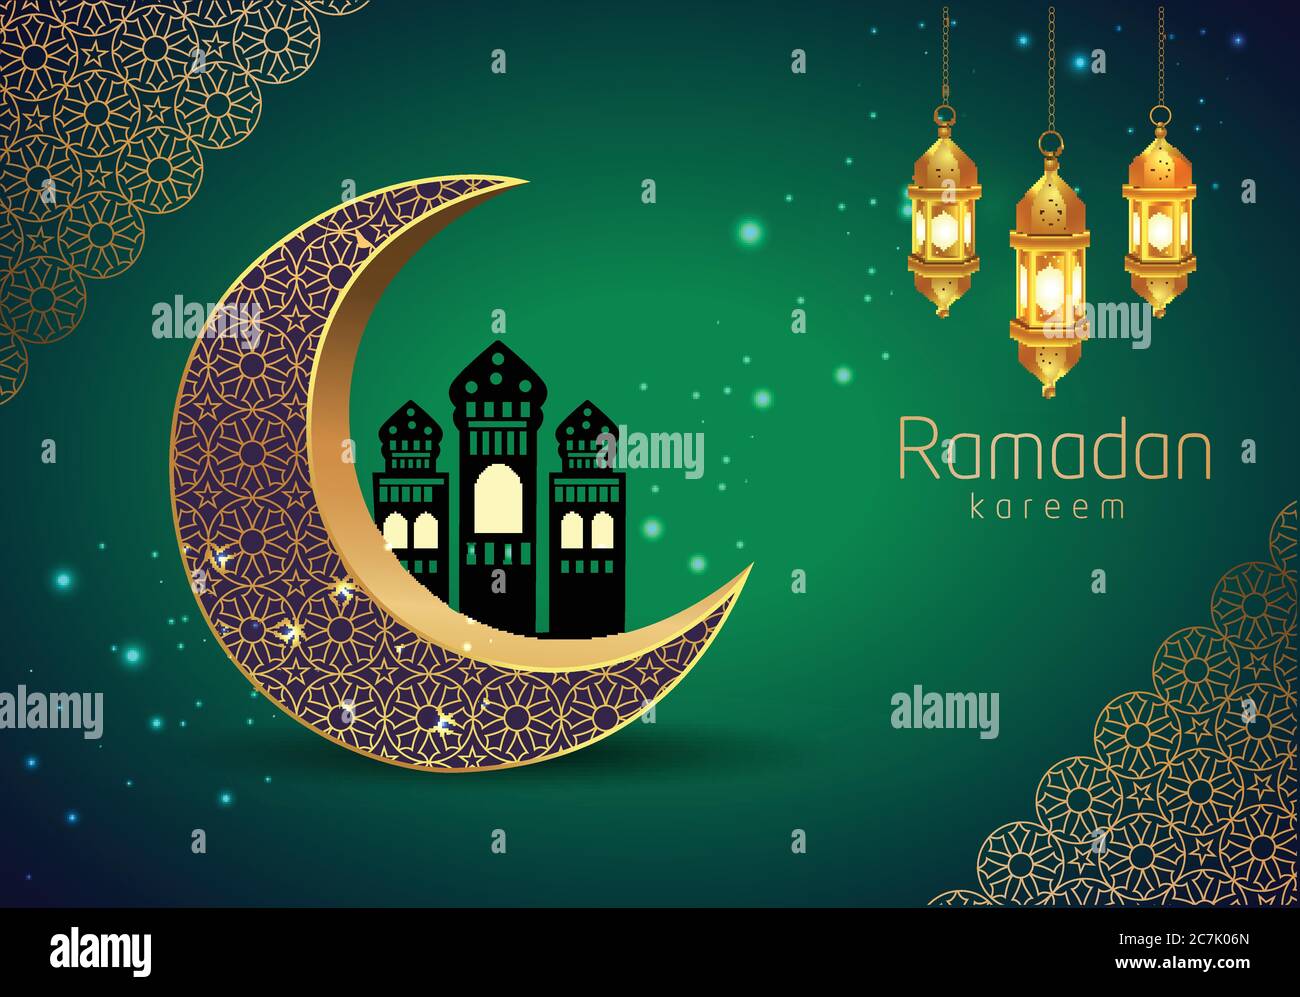 Ramadan Kareem greeting card design with half moon and mosque on green background.Hanging stars Stock Vector